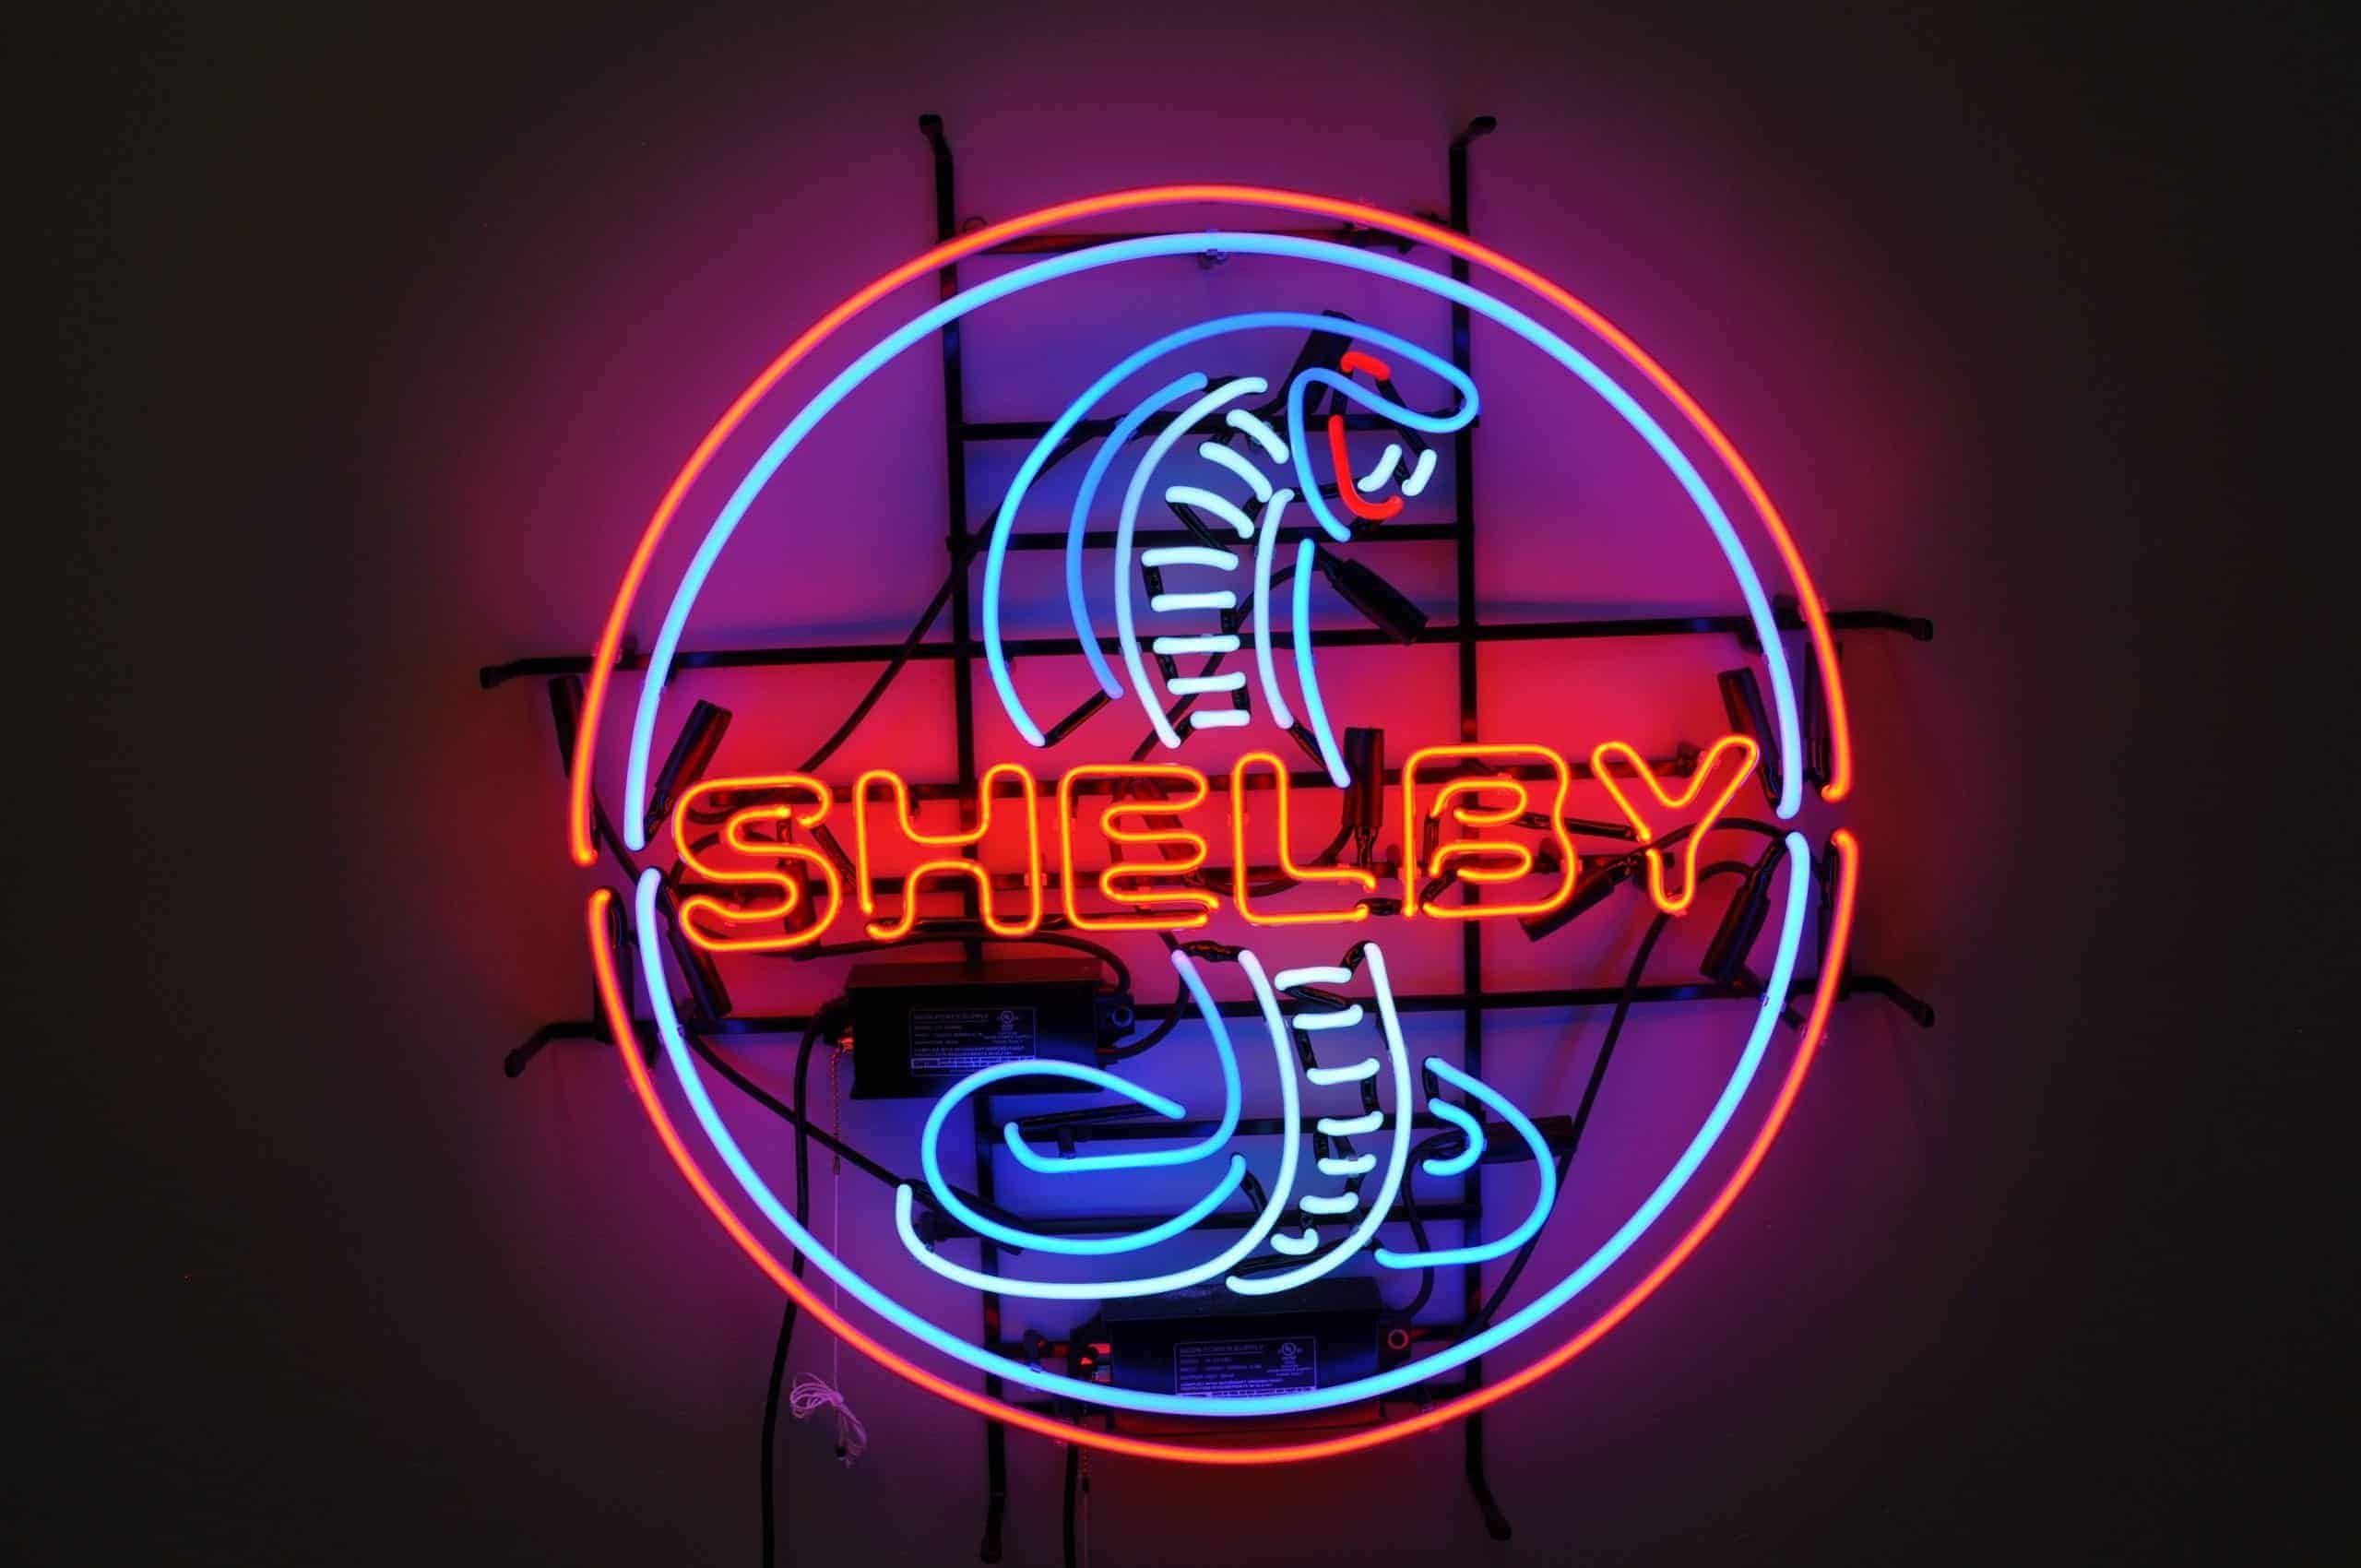 Shelby Neon